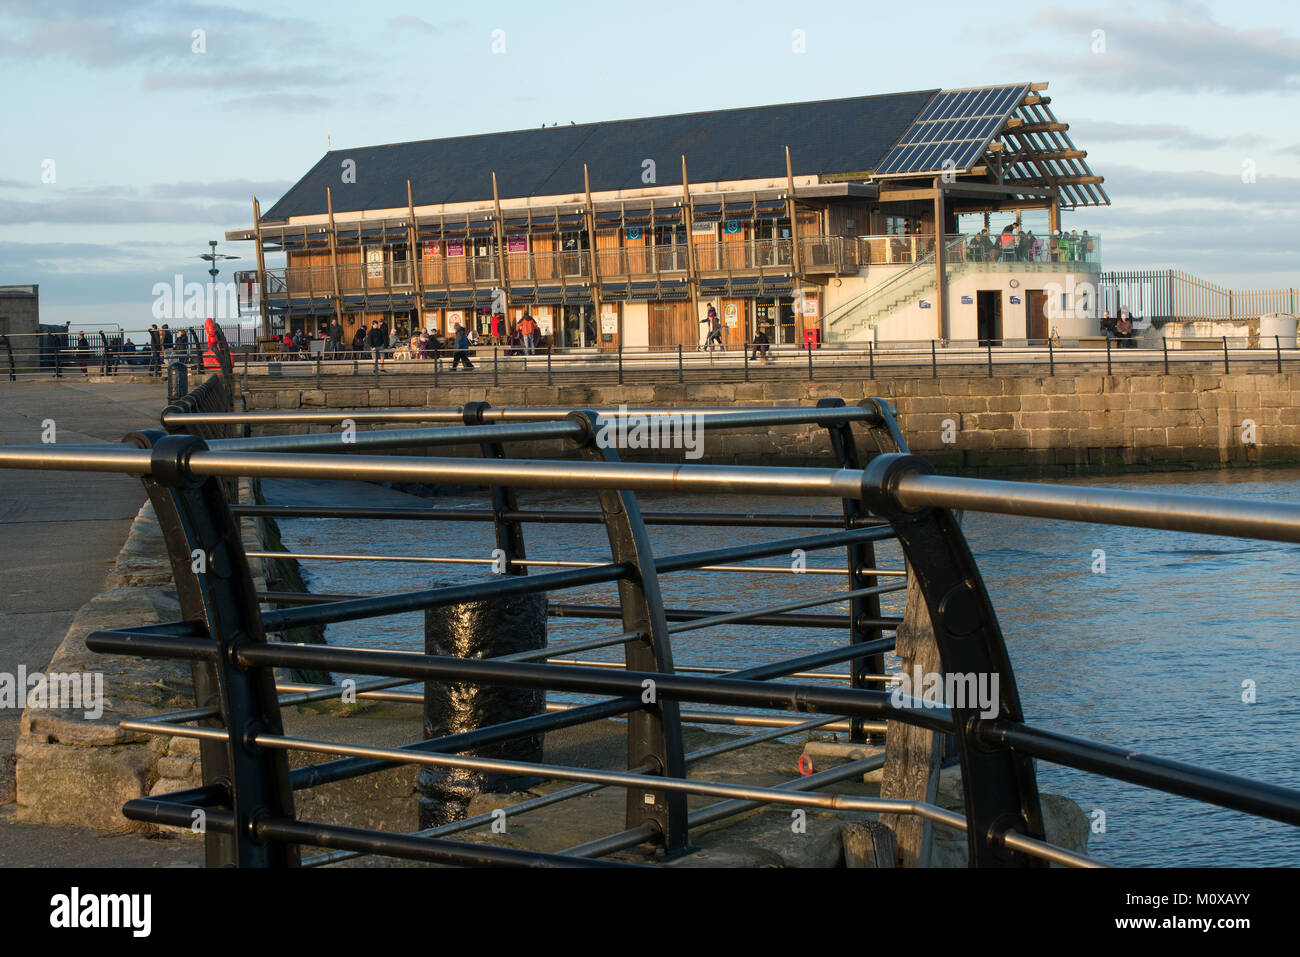 Seaham Harbour visitor area showing small shops and cafes Stock Photo